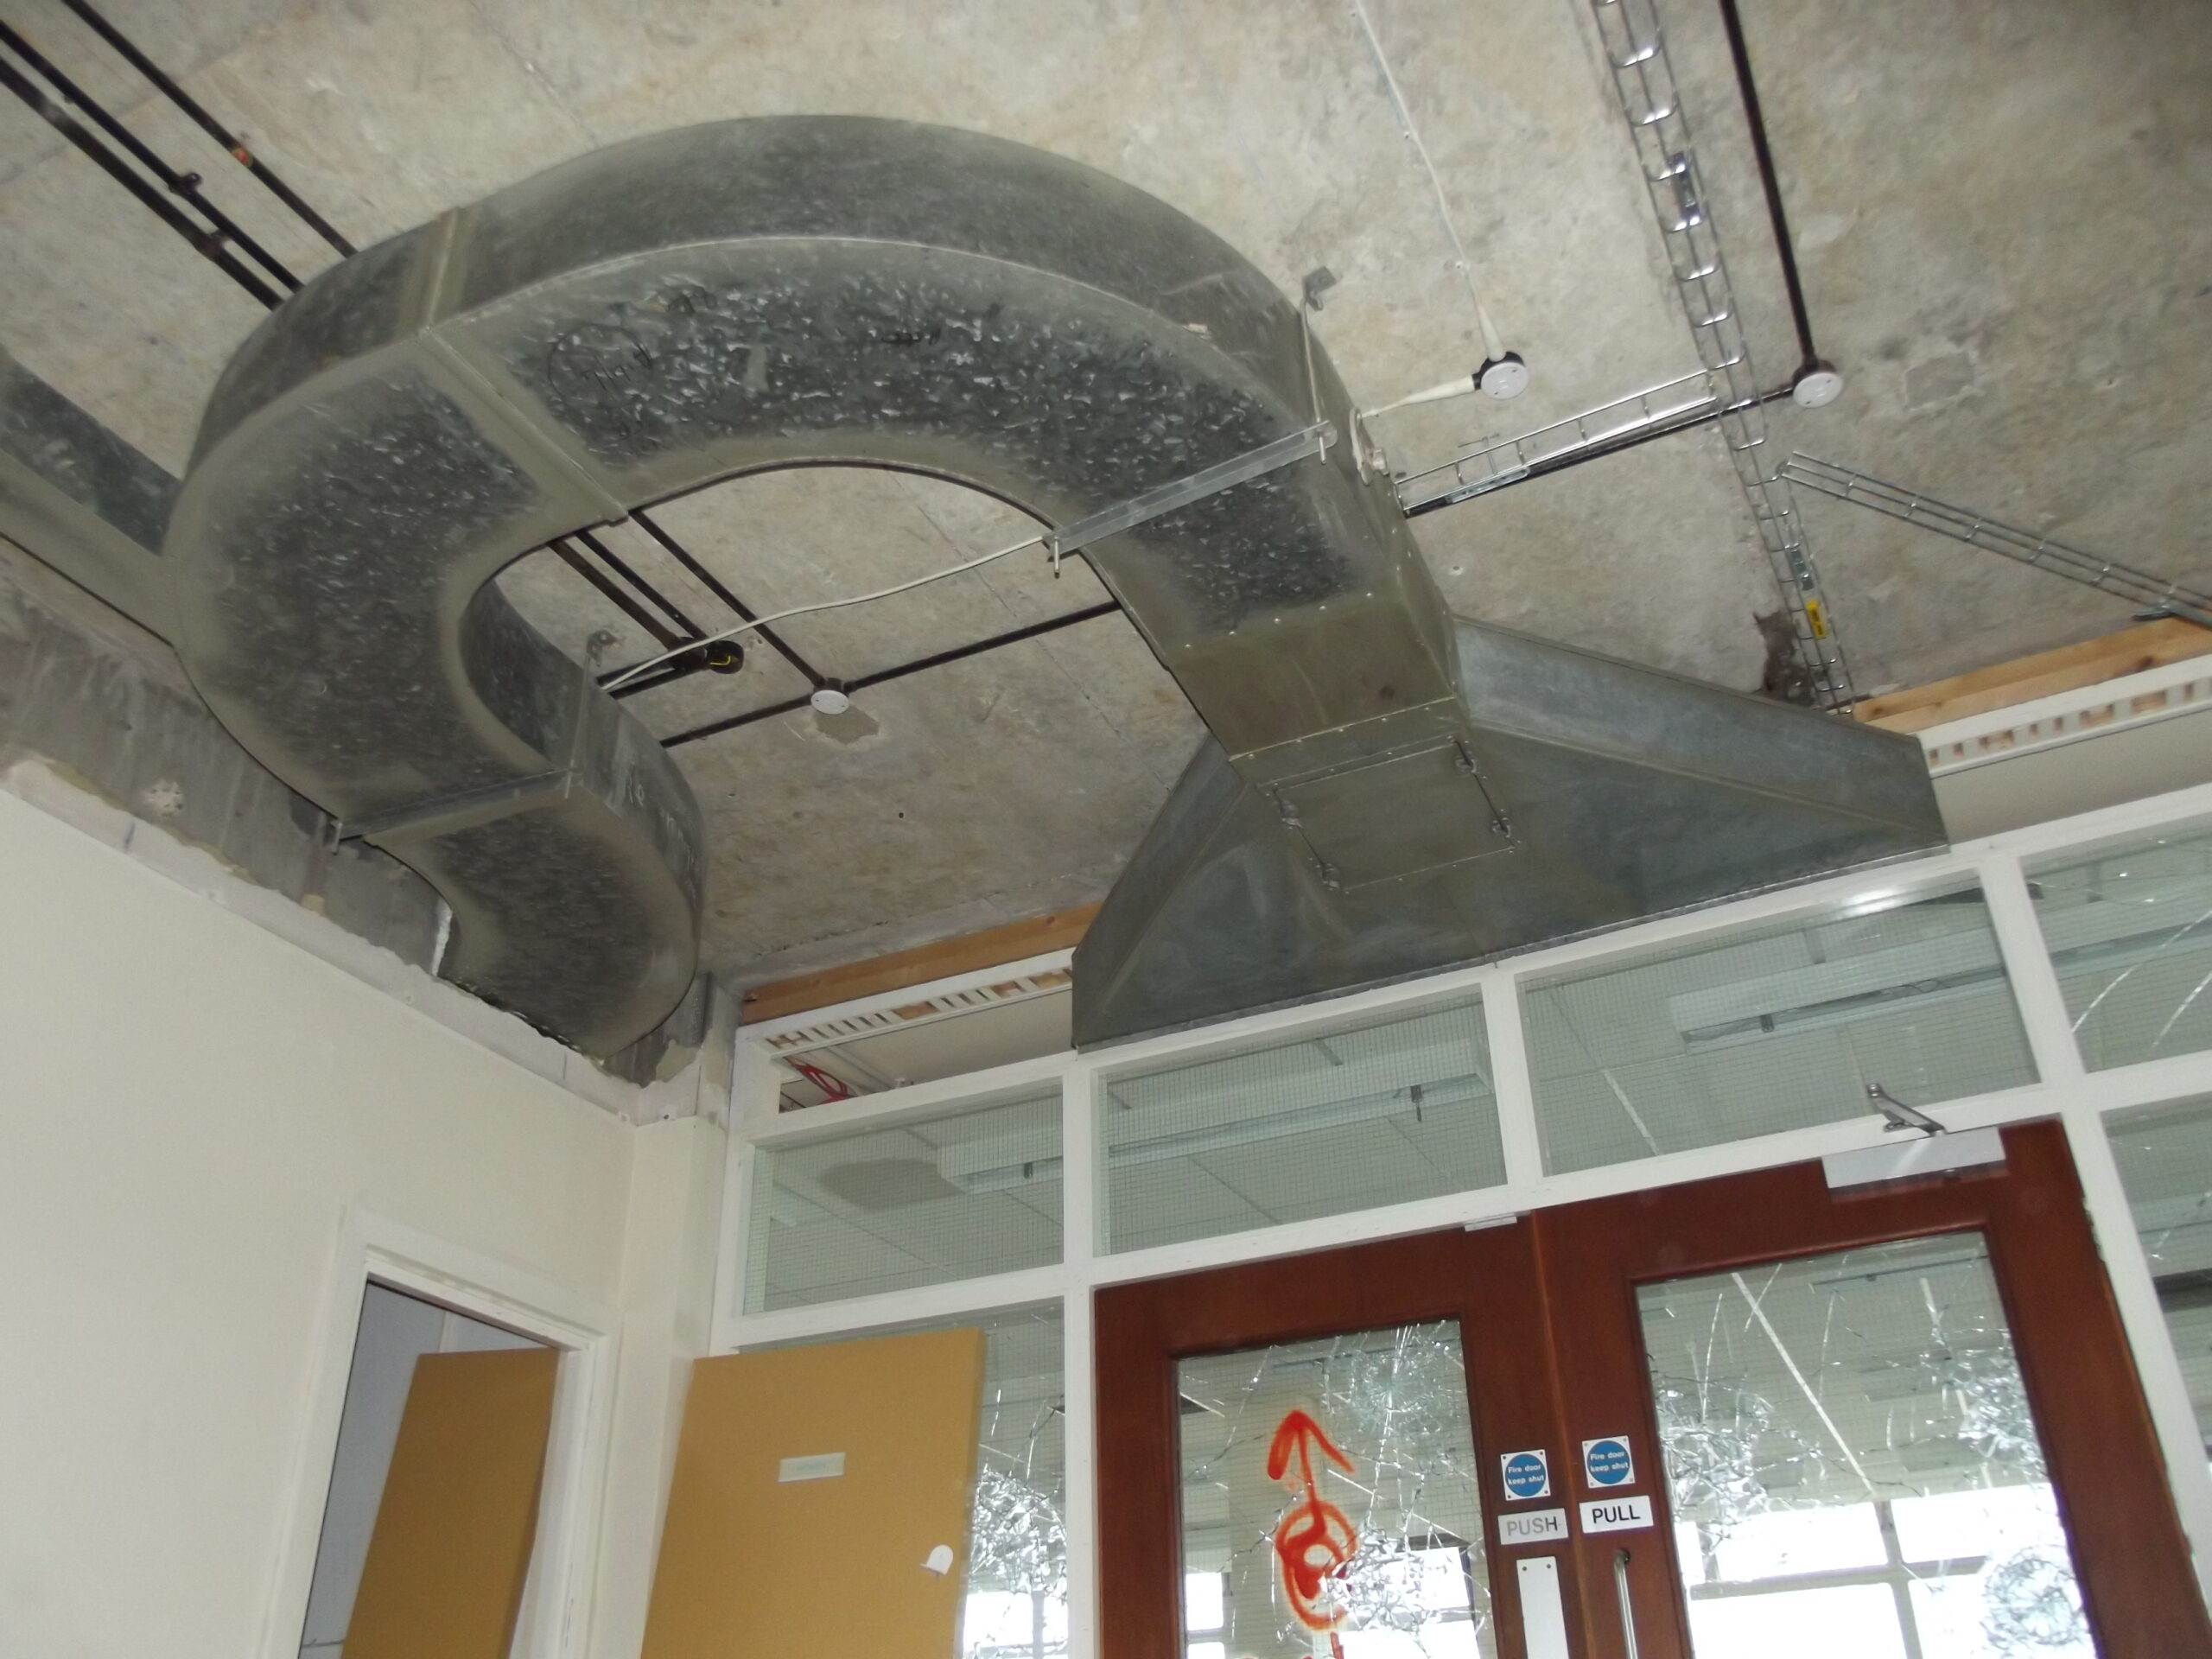 A Core, 5th floor after asbestos removal